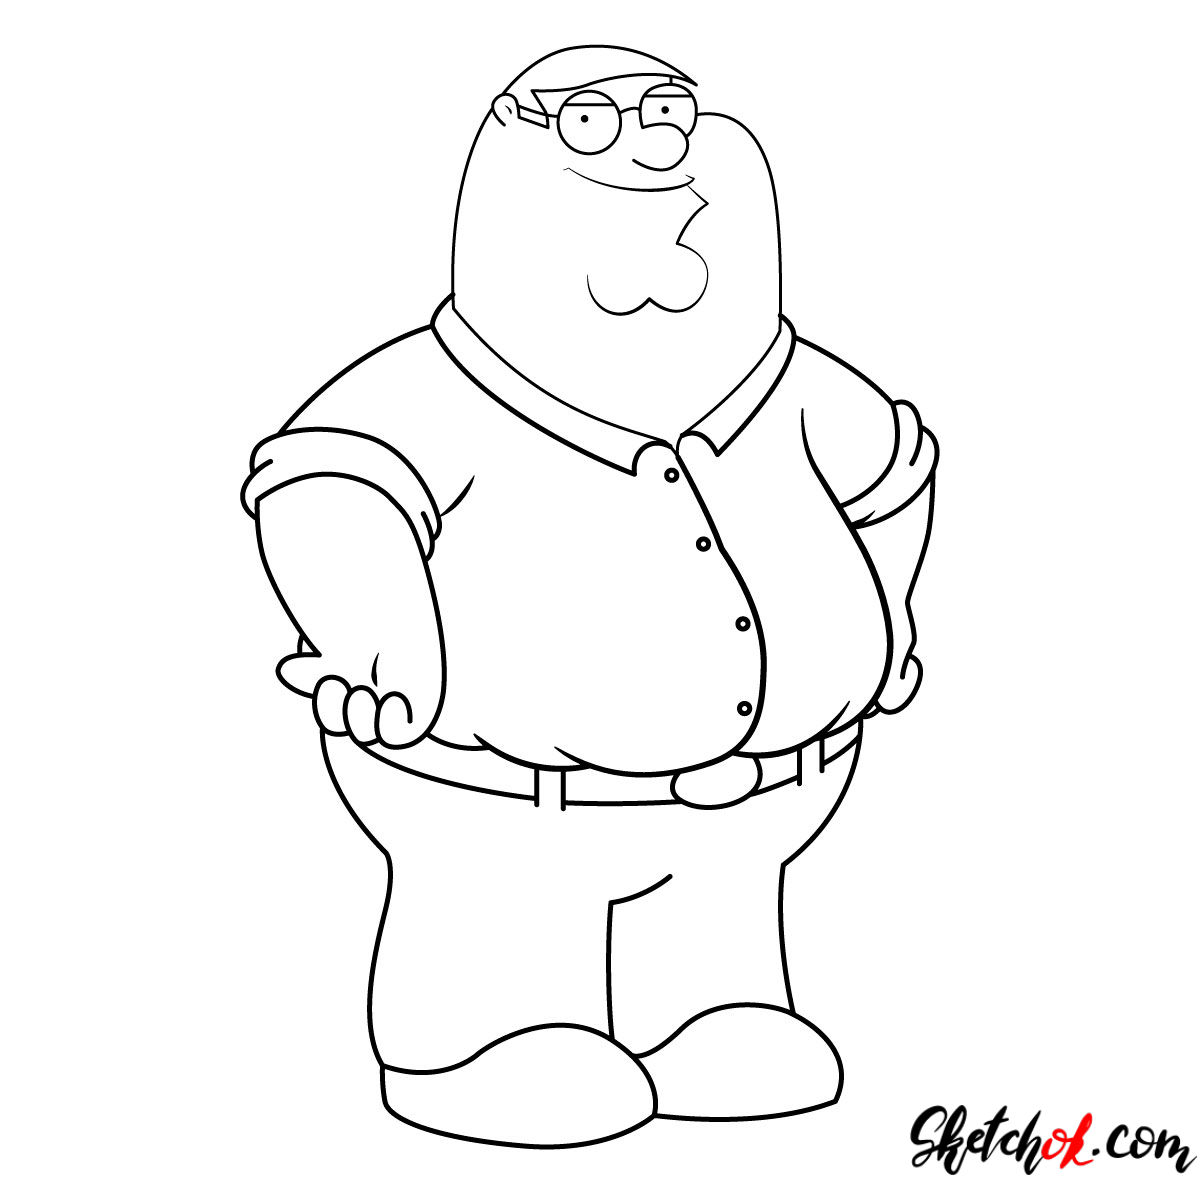 How to draw Peter Griffin - Sketchok easy drawing guides